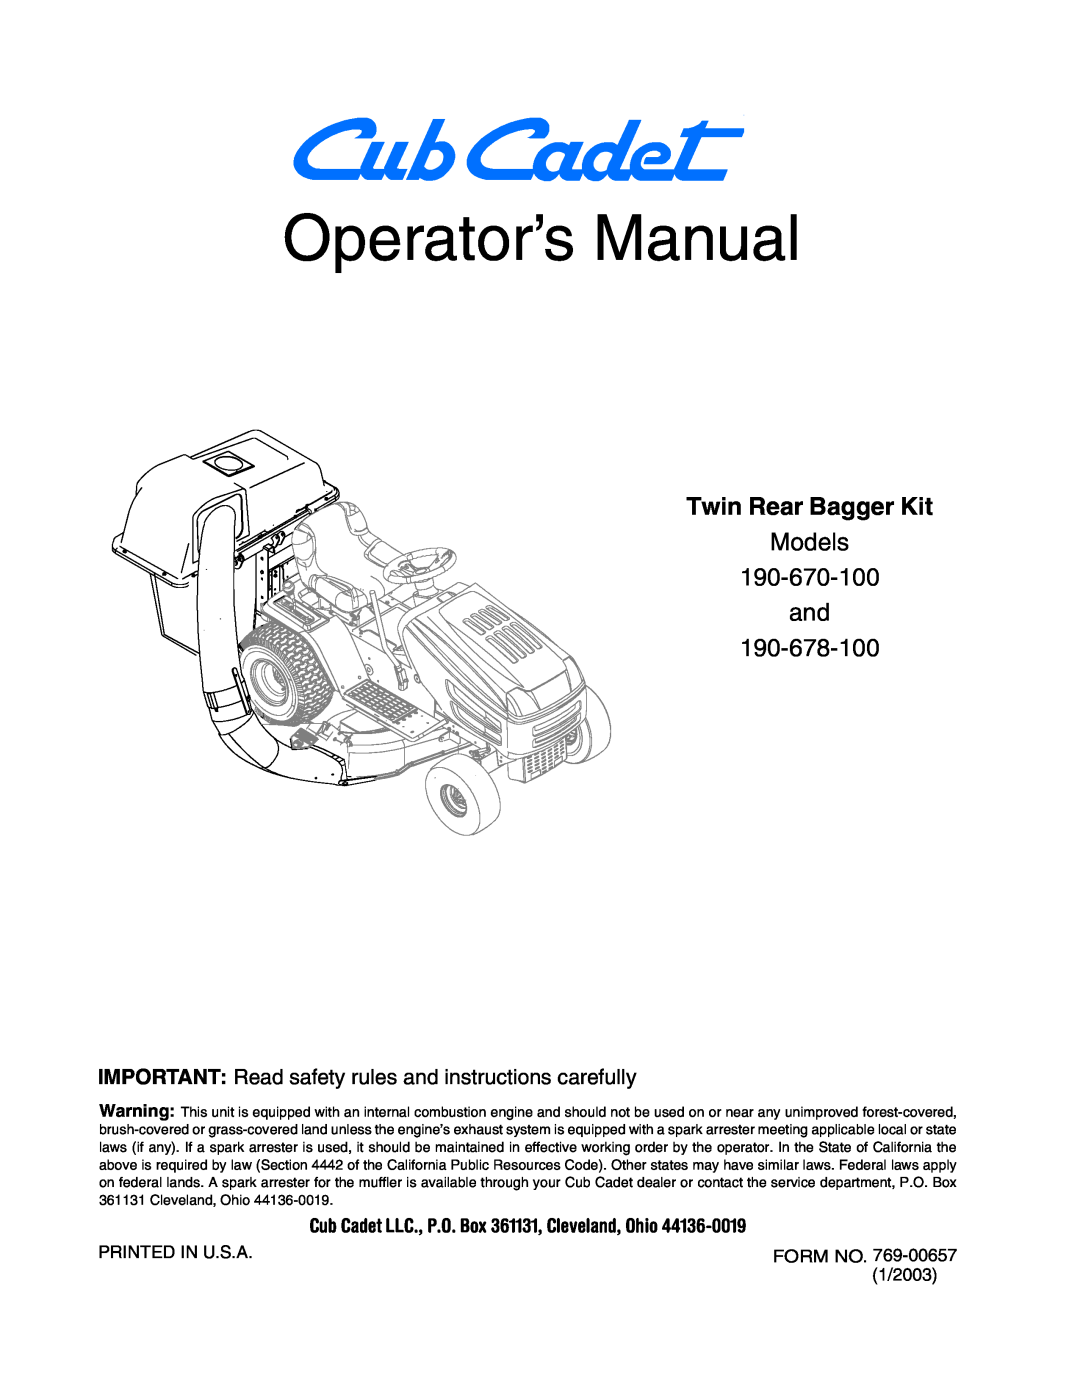 Cub Cadet 190-678-100, 190-670-100 manual IMPORTANT Read safety rules and instructions carefully, Operator’s Manual 